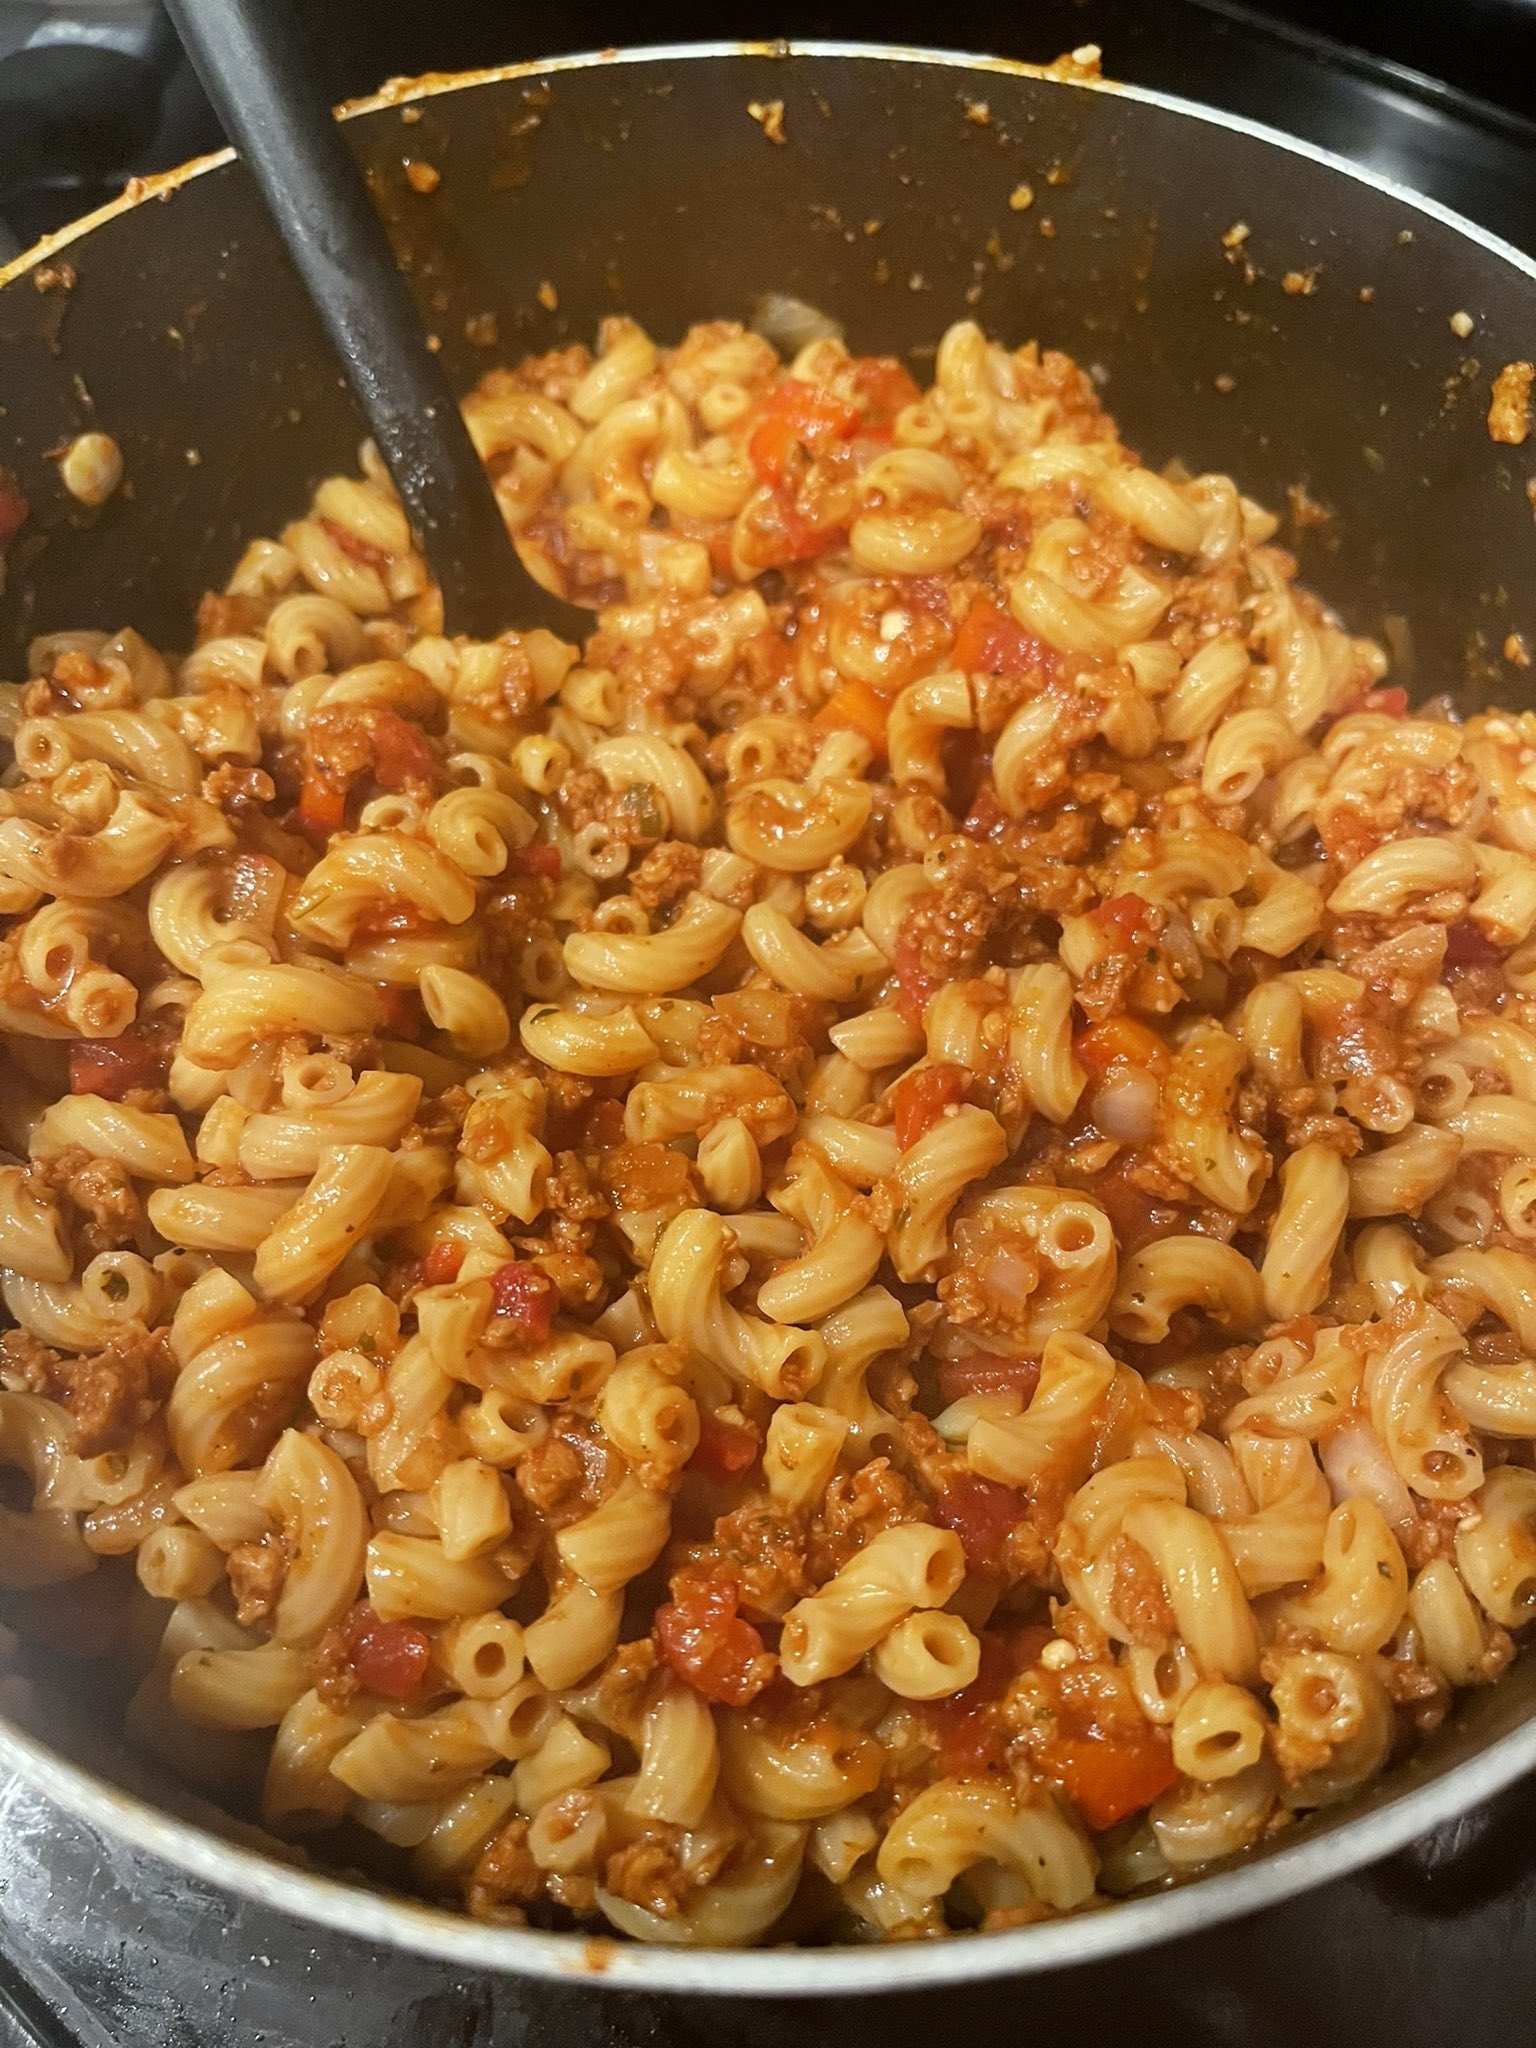 Close-up of Beefaroni in a pan